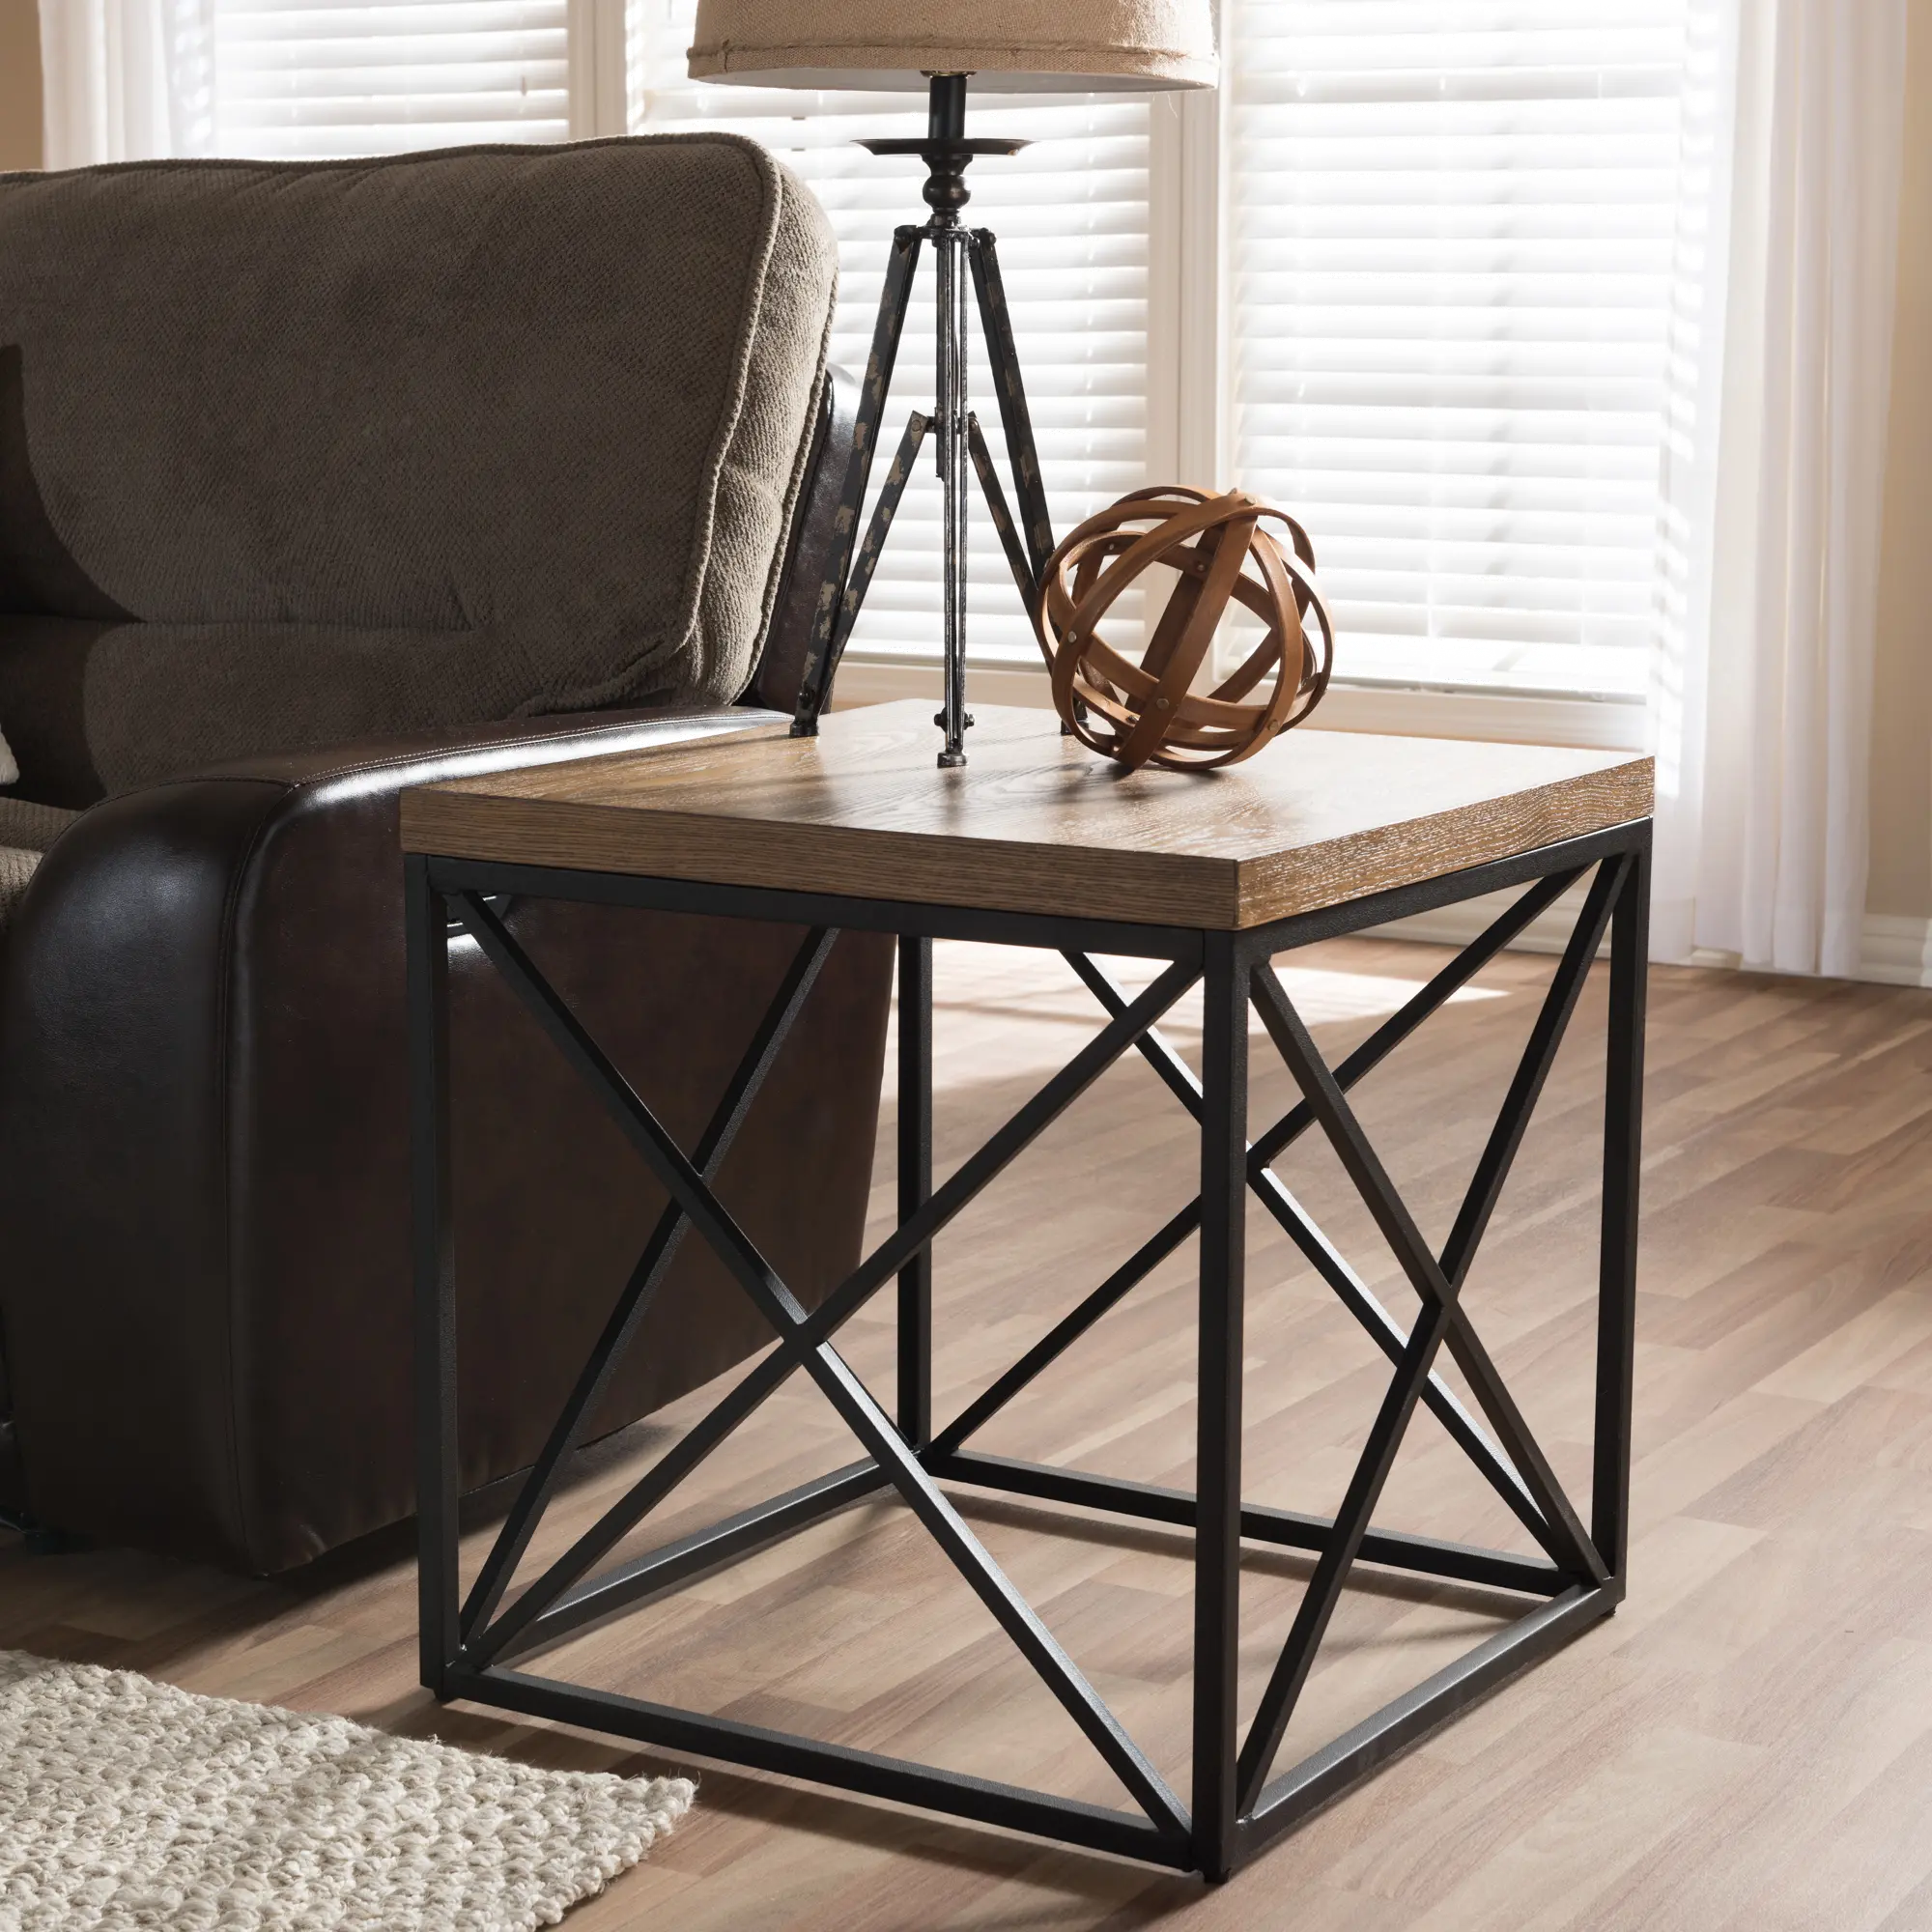 7329-RCW Vintage Industrial End Table - Holden sku 7329-RCW